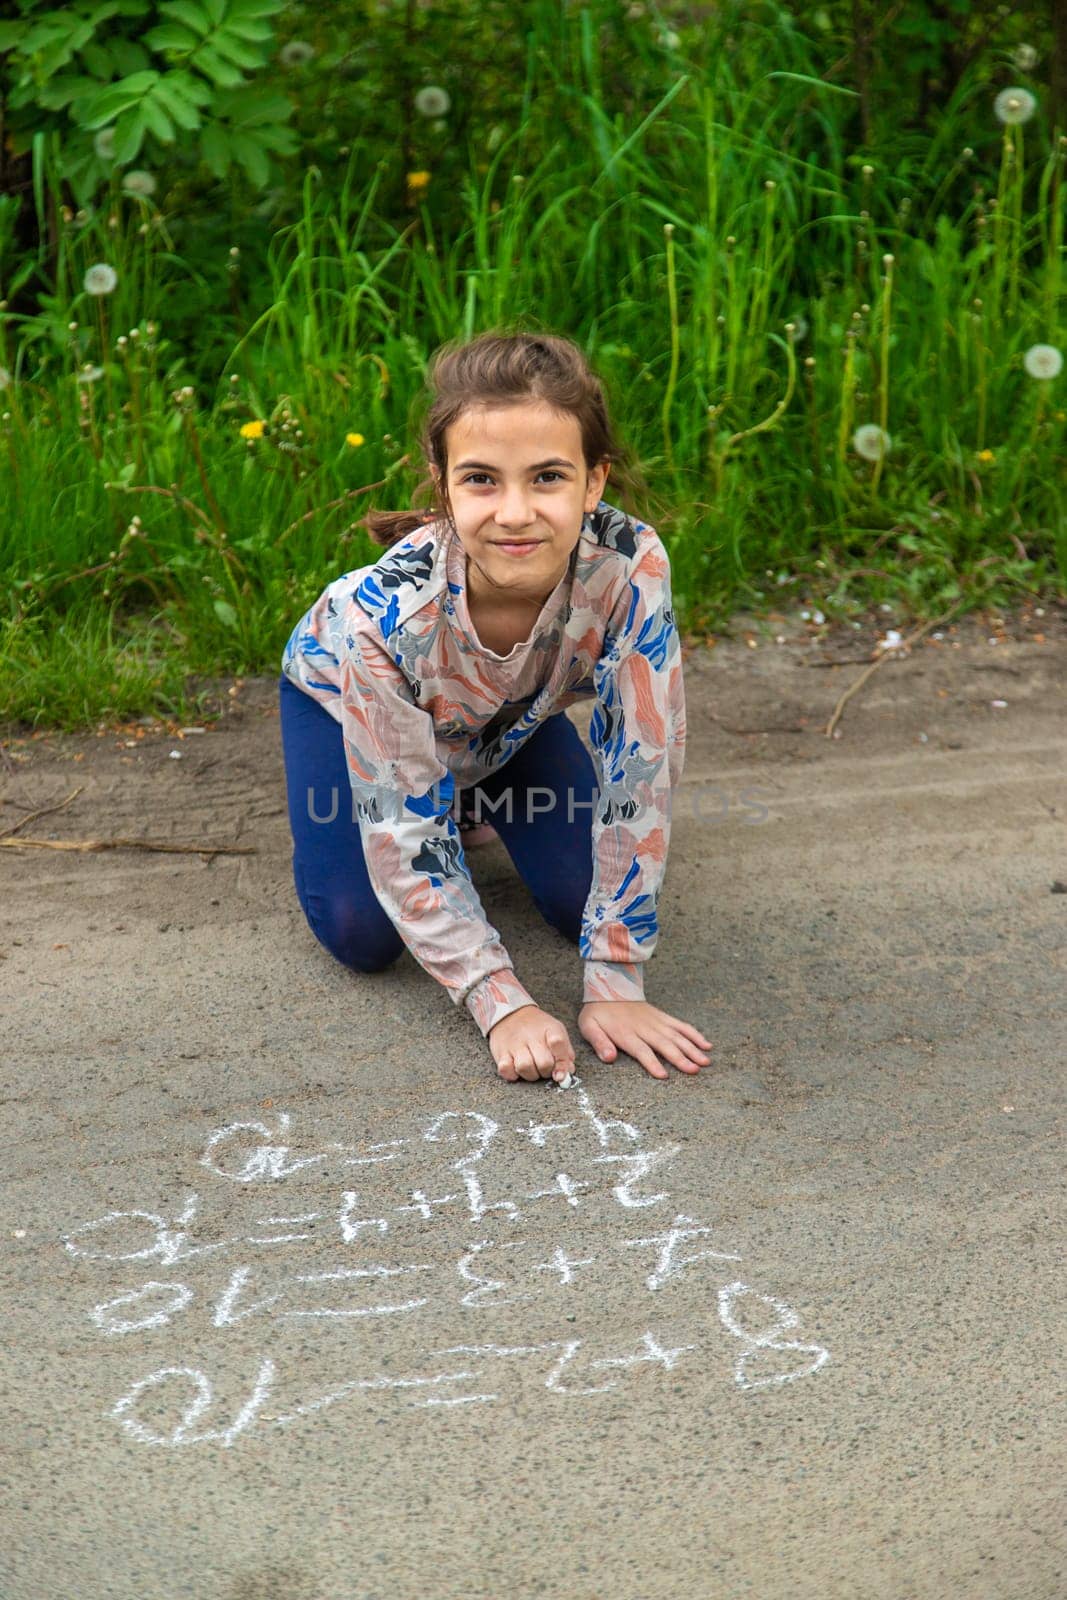 Children draw equations on the pavement with chalk. Selective focus. Kid.